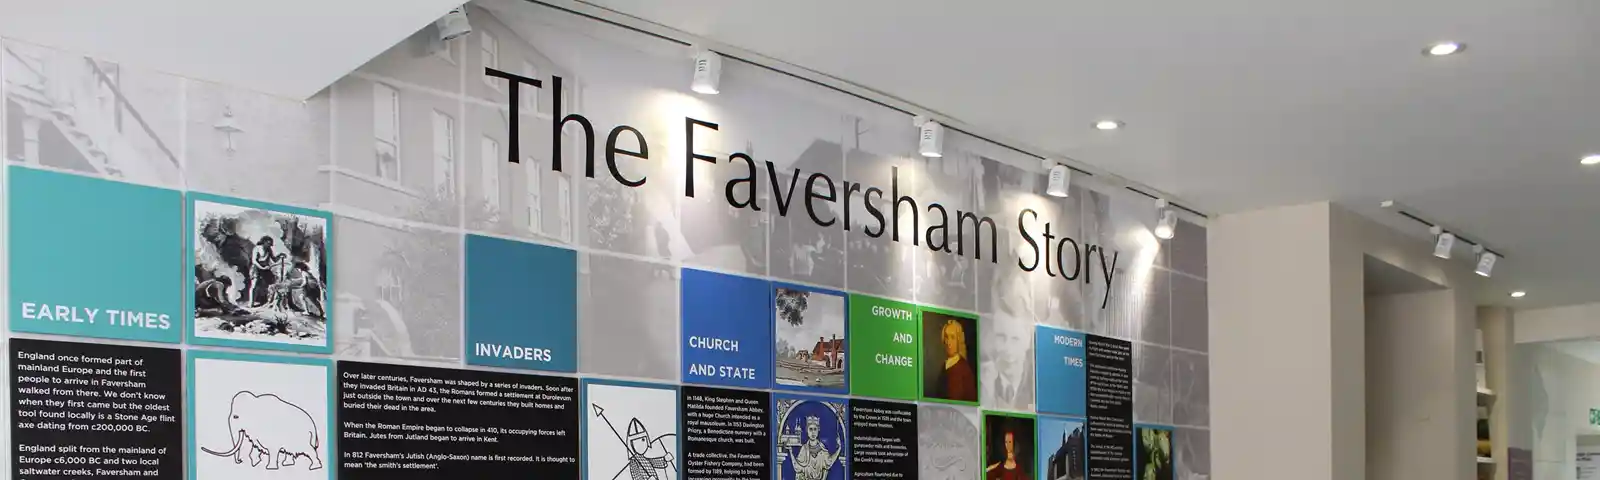 Faversham Story Fleur Museums and Heritage Page.jpg